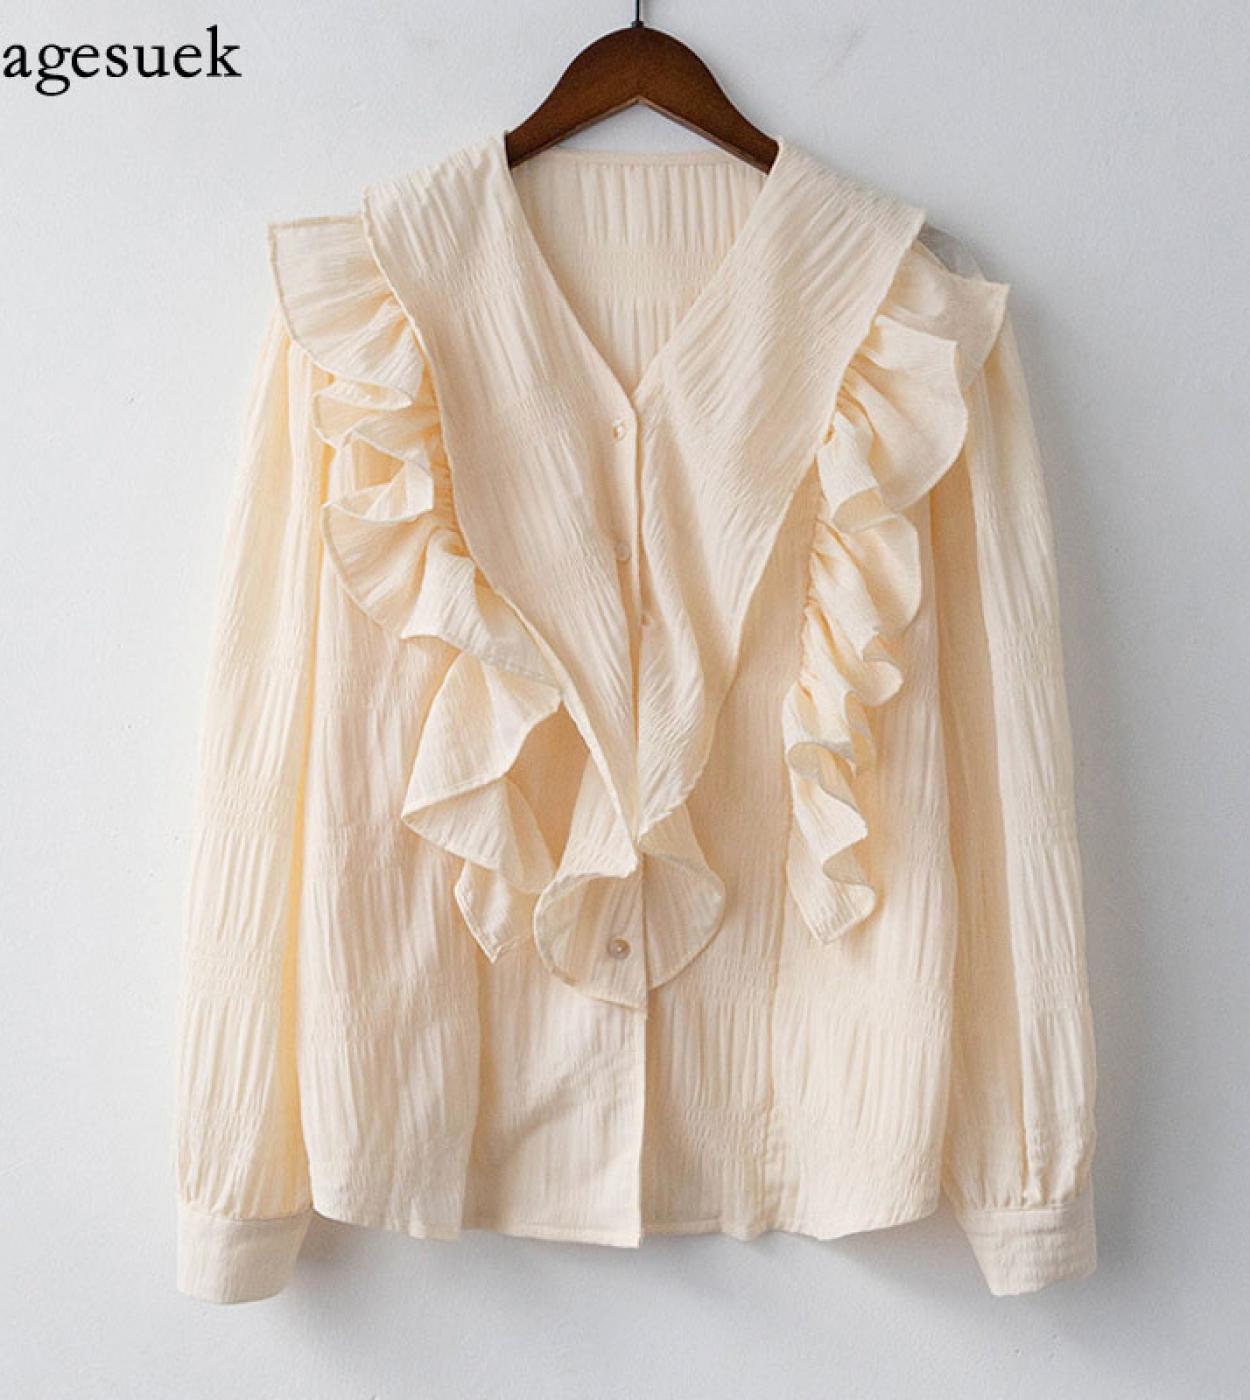  Fashion Long Sleeve Blouse Women V Collar Ruffle Elegant Tops And Blouses White Shirts Spring Loose Sweet Clothes 13577